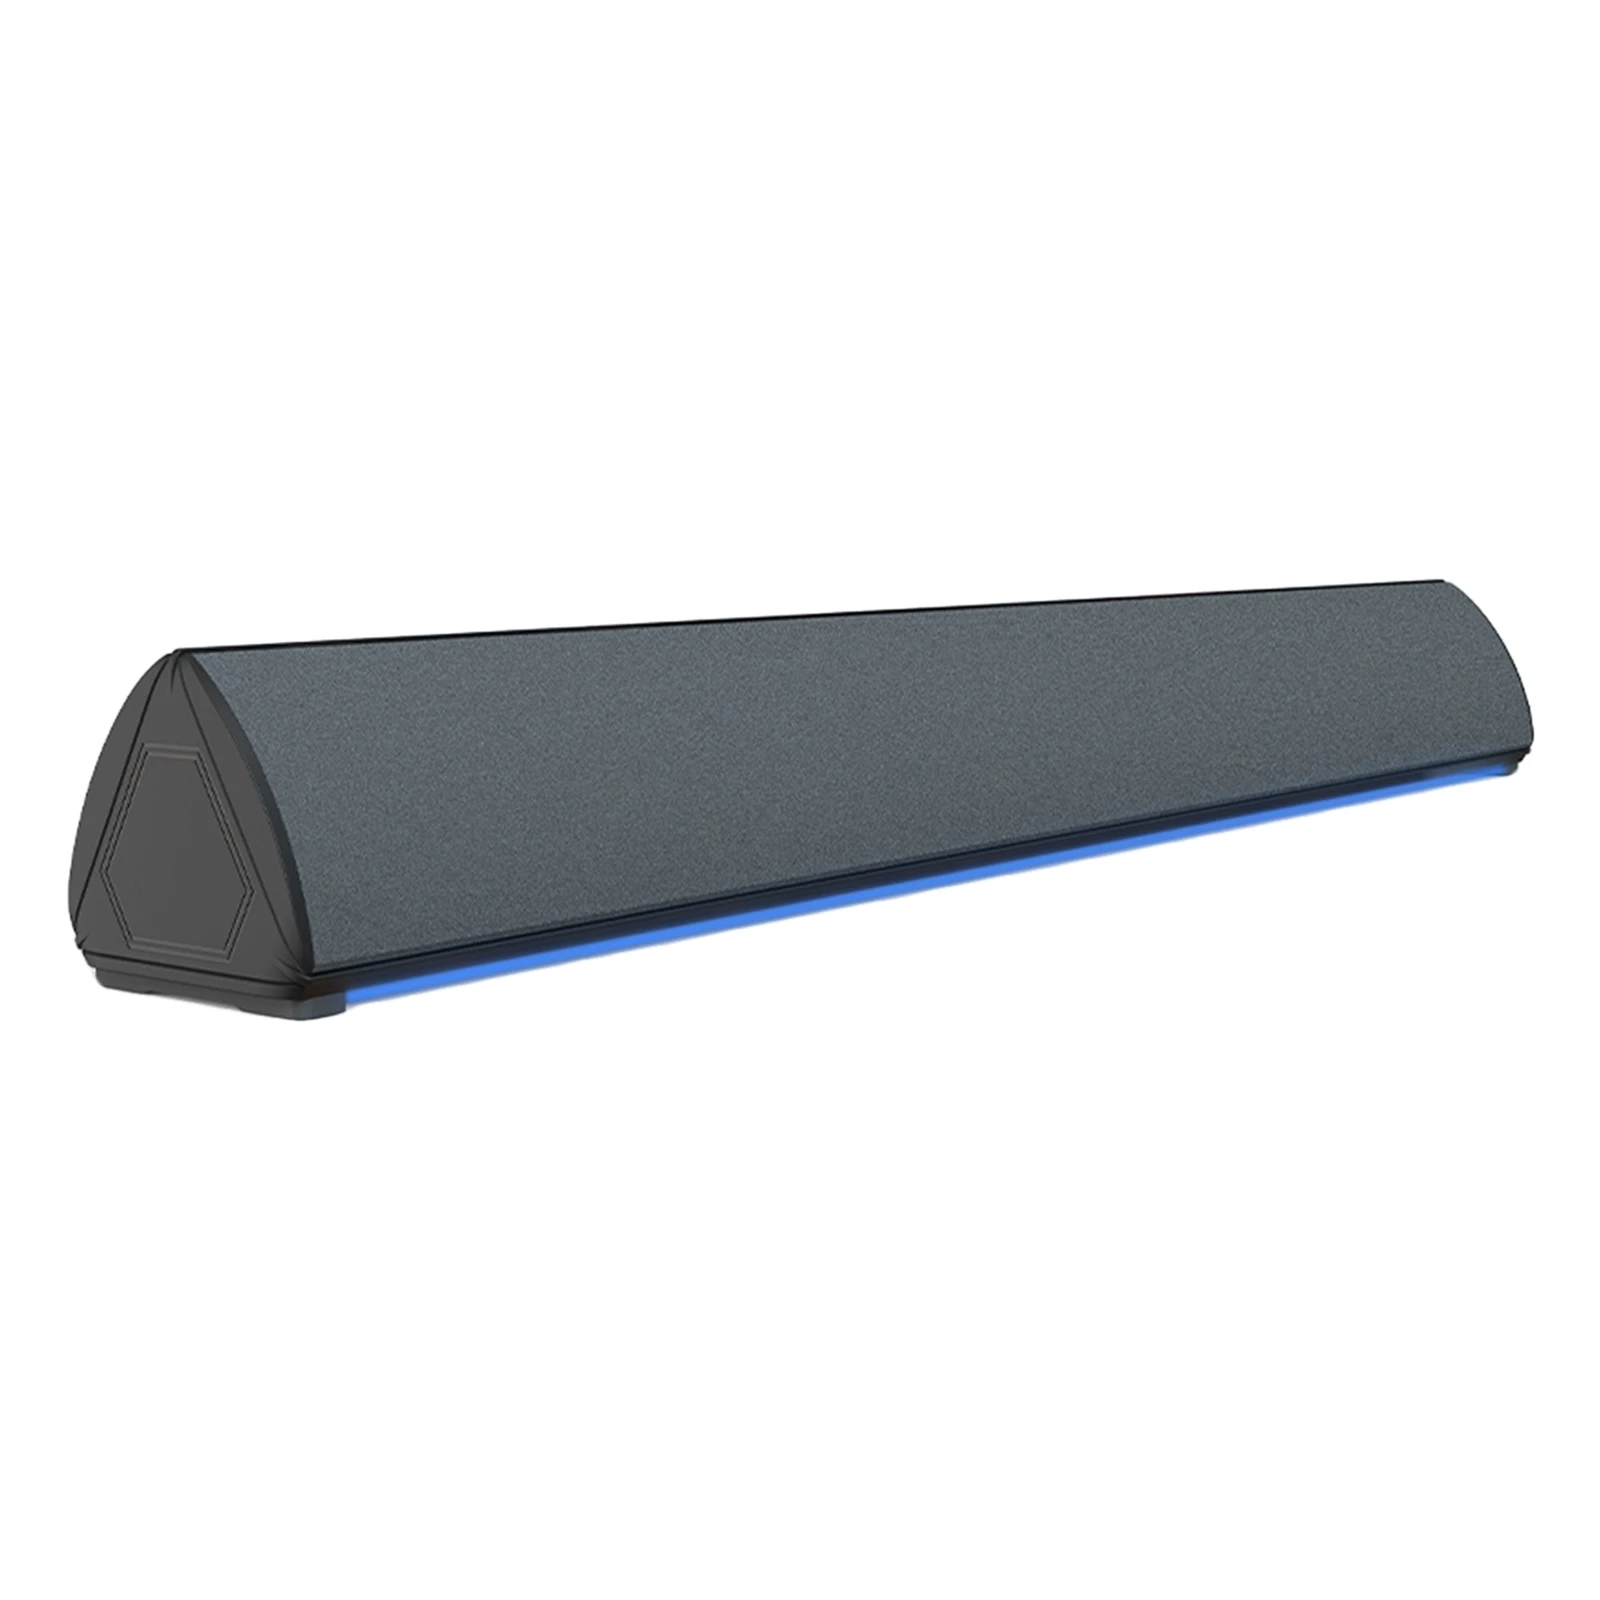 Sound Bar with Built-in Subwoofer Bluetooth 5.0 Speaker Soundbar for Home Theater 